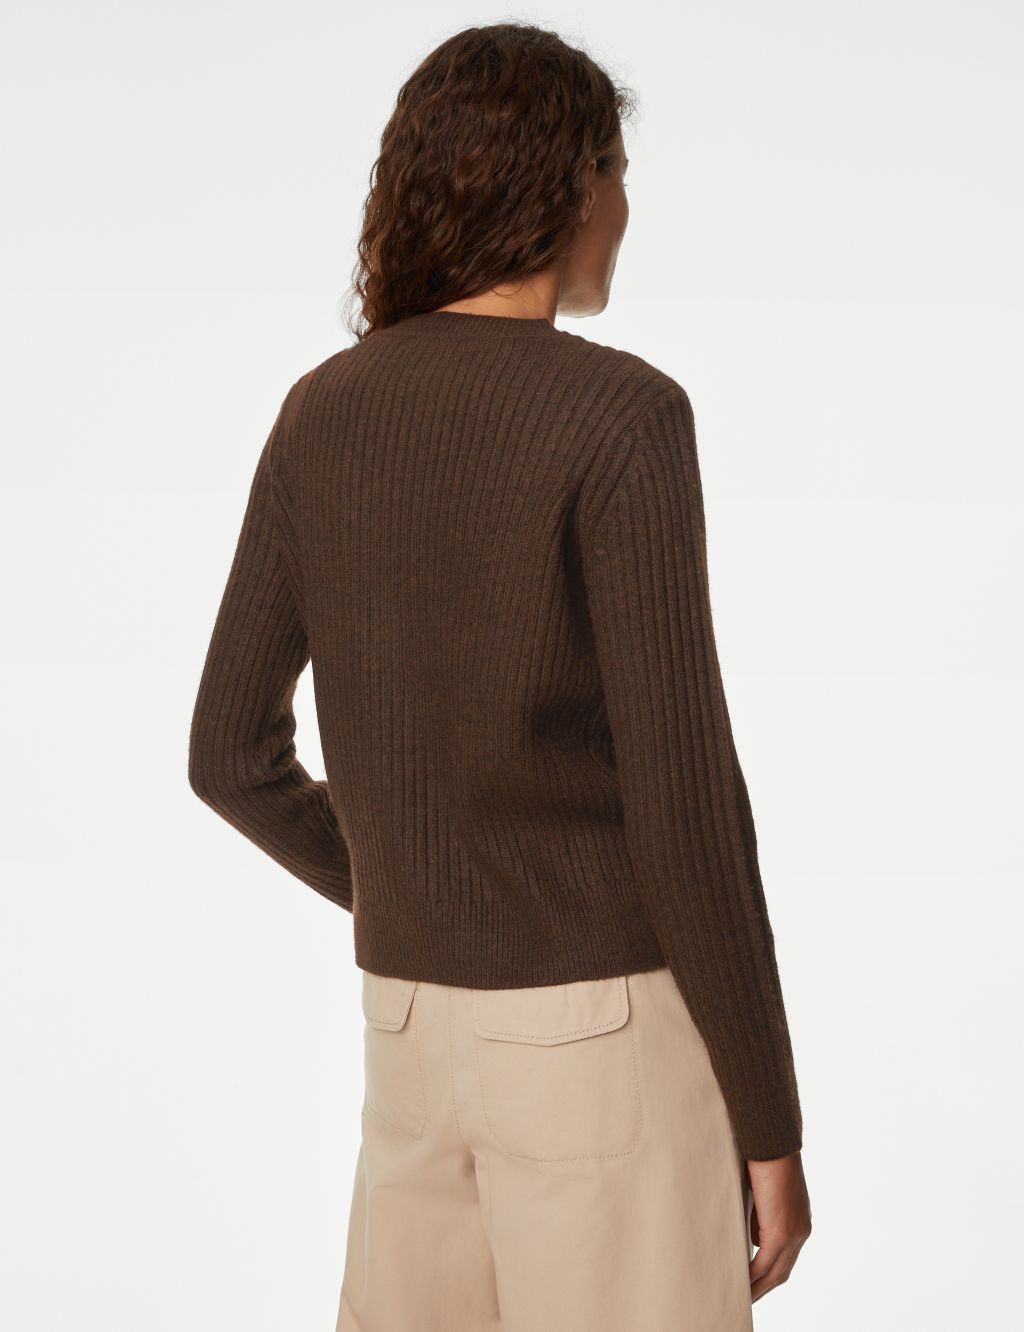 Knitted Ribbed Crew Neck Cardigan image 5